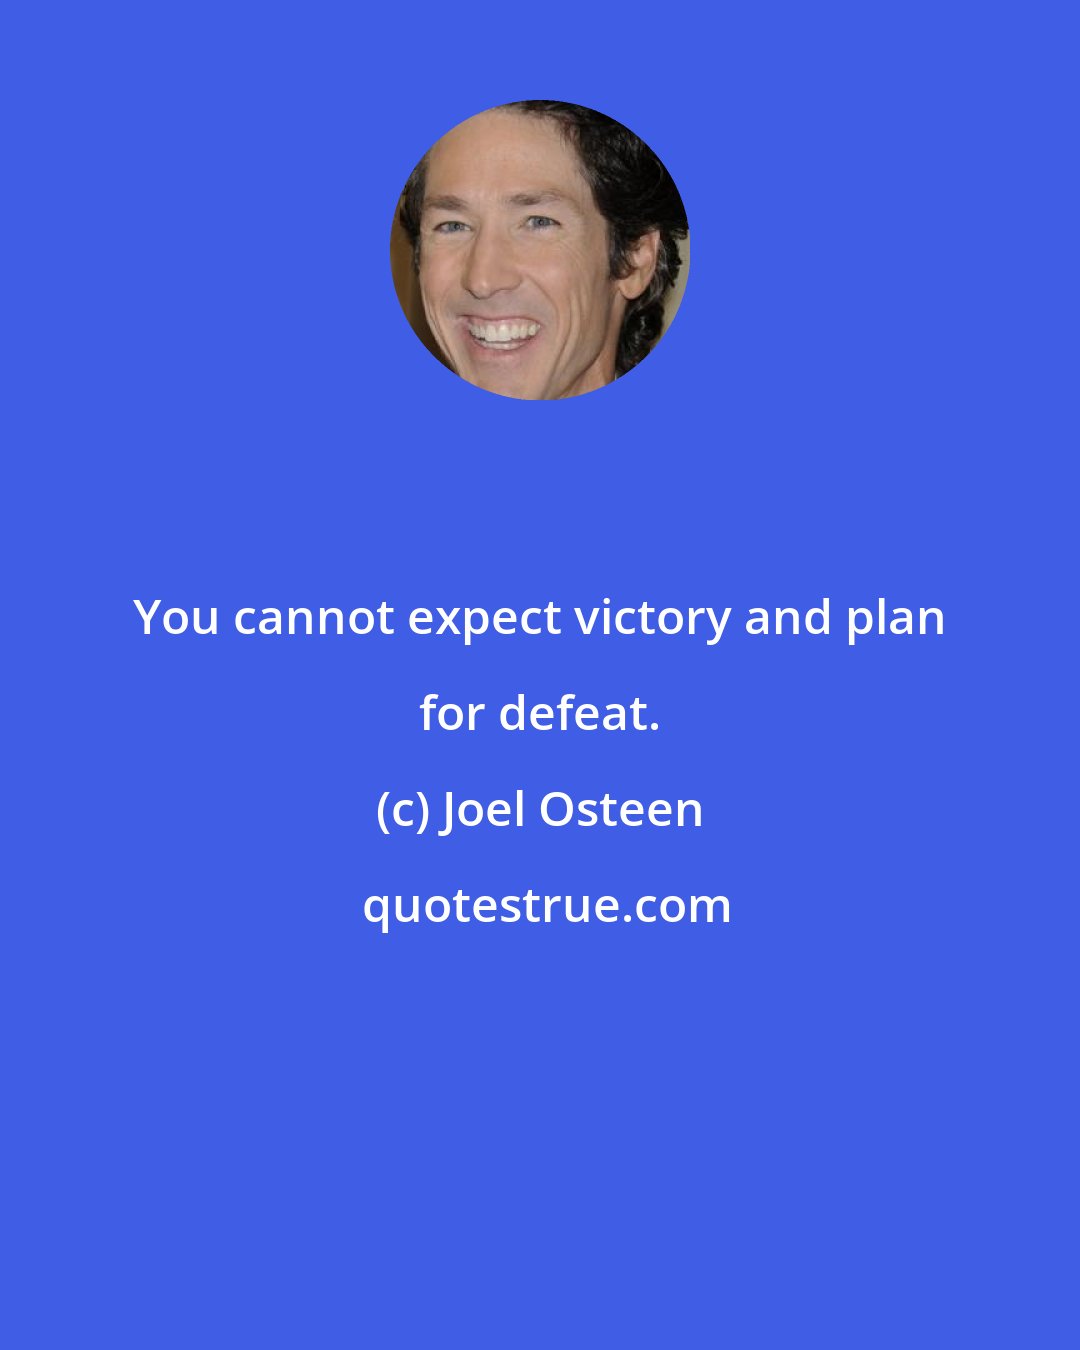 Joel Osteen: You cannot expect victory and plan for defeat.